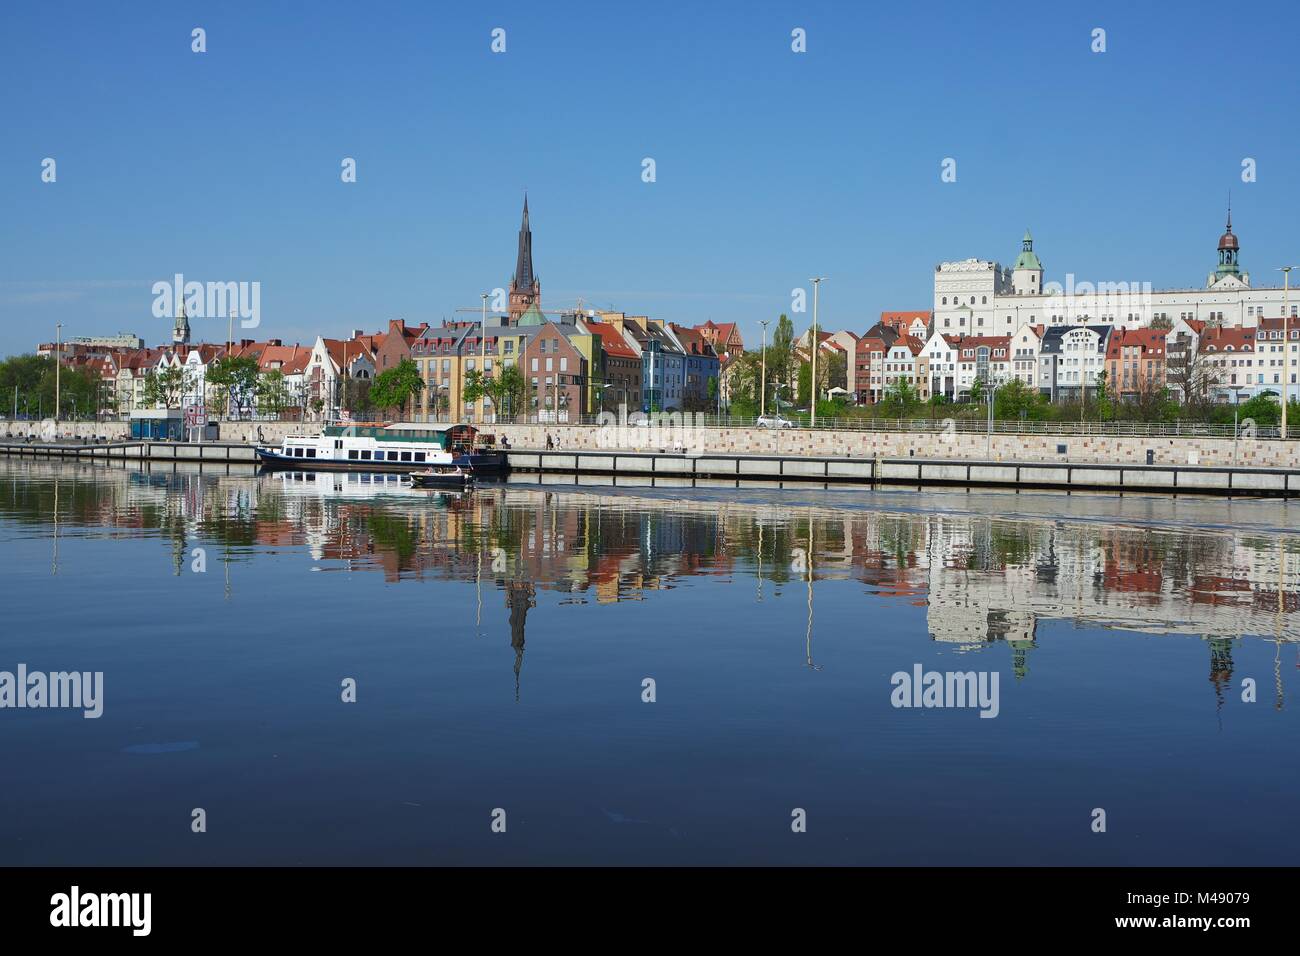 Szczecin, Old Town on the Odra River Stock Photo